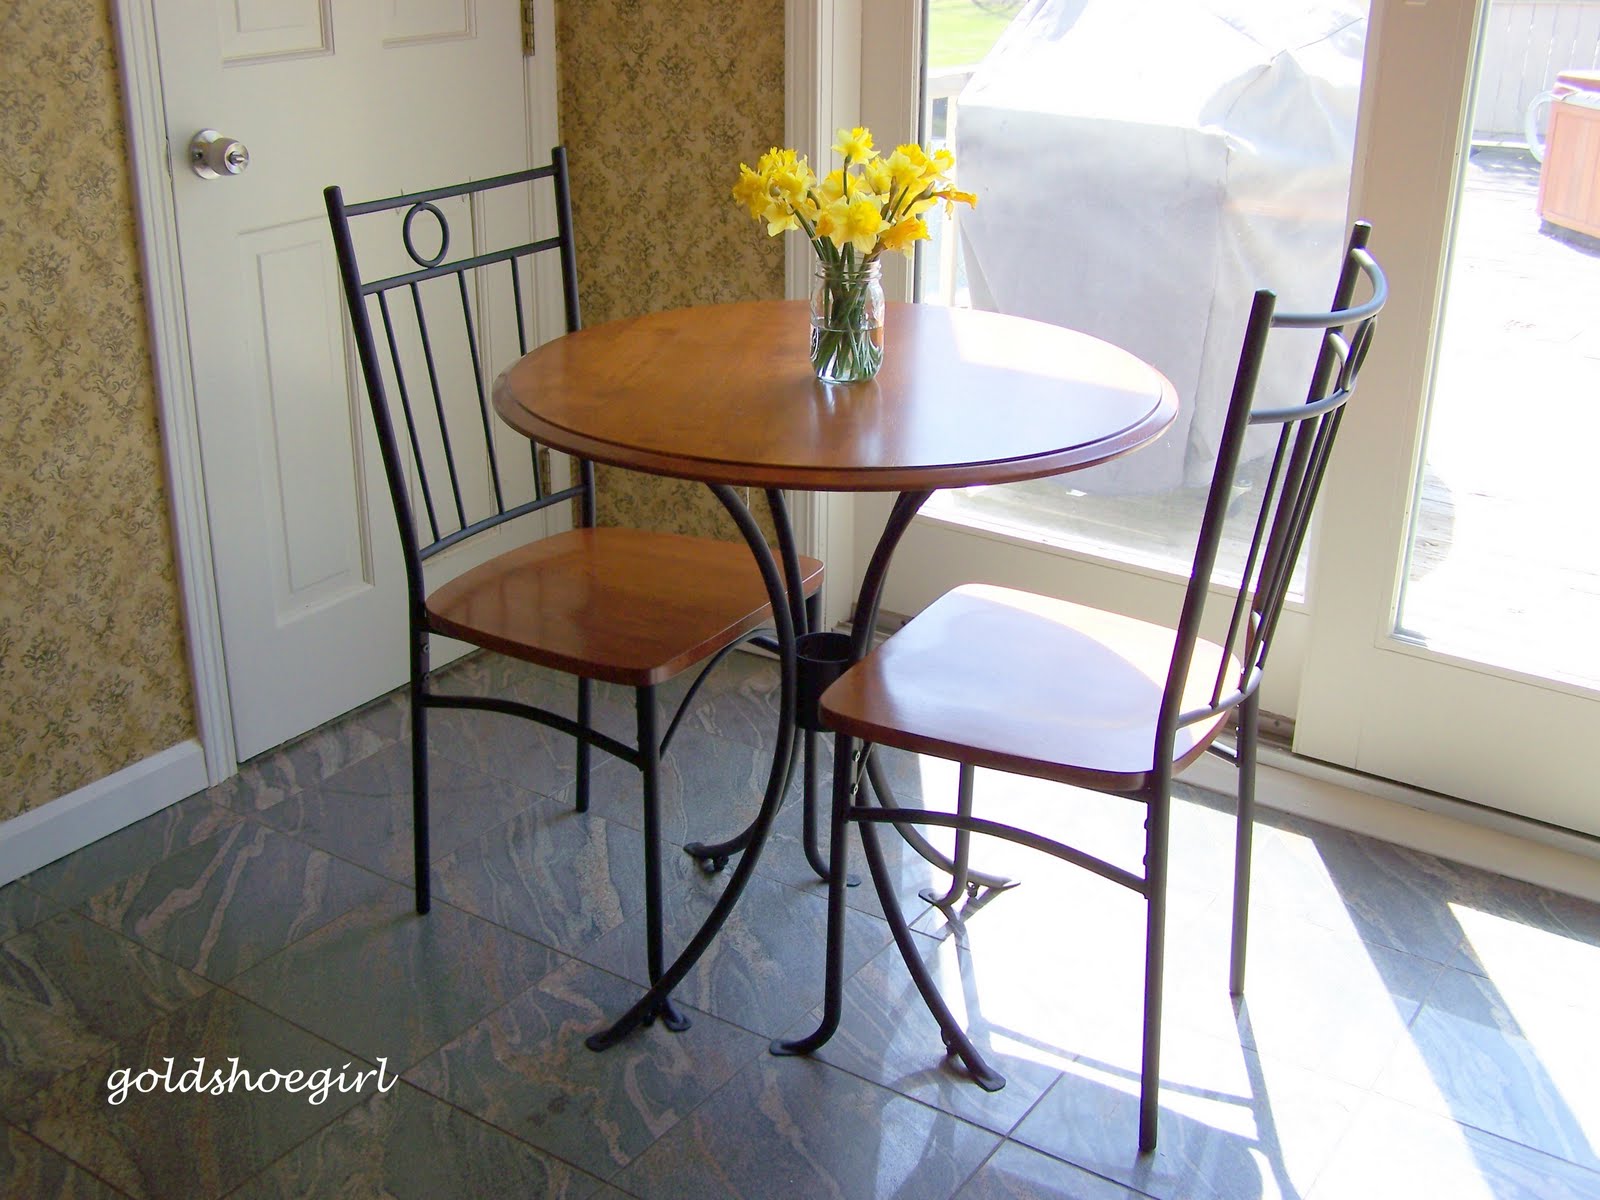 Gold Shoe Girl: New Kitchen Table Set